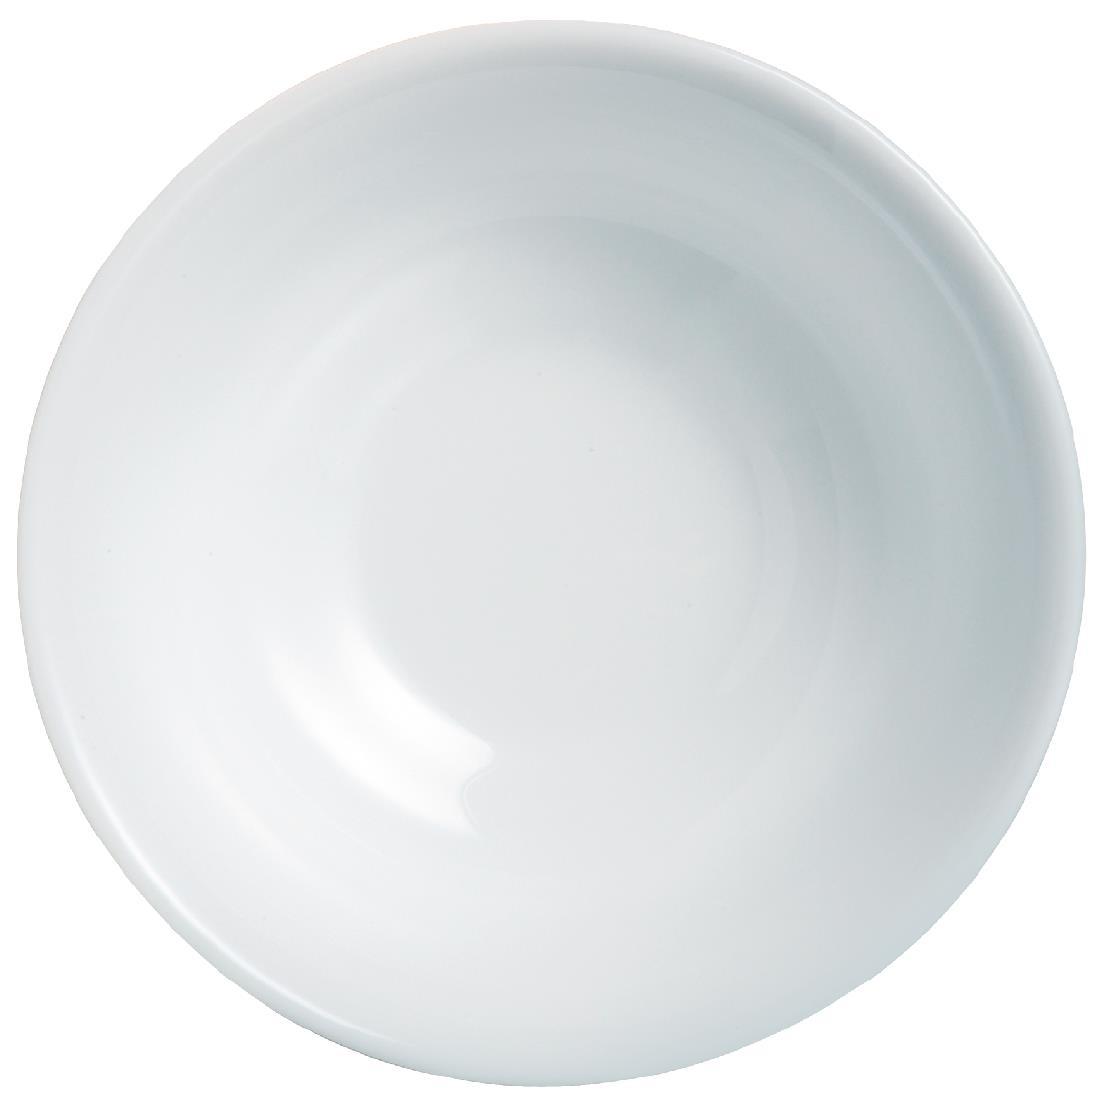 Arcoroc Opal All Purpose Bowls 160mm (Pack of 6) - DP072  - 2